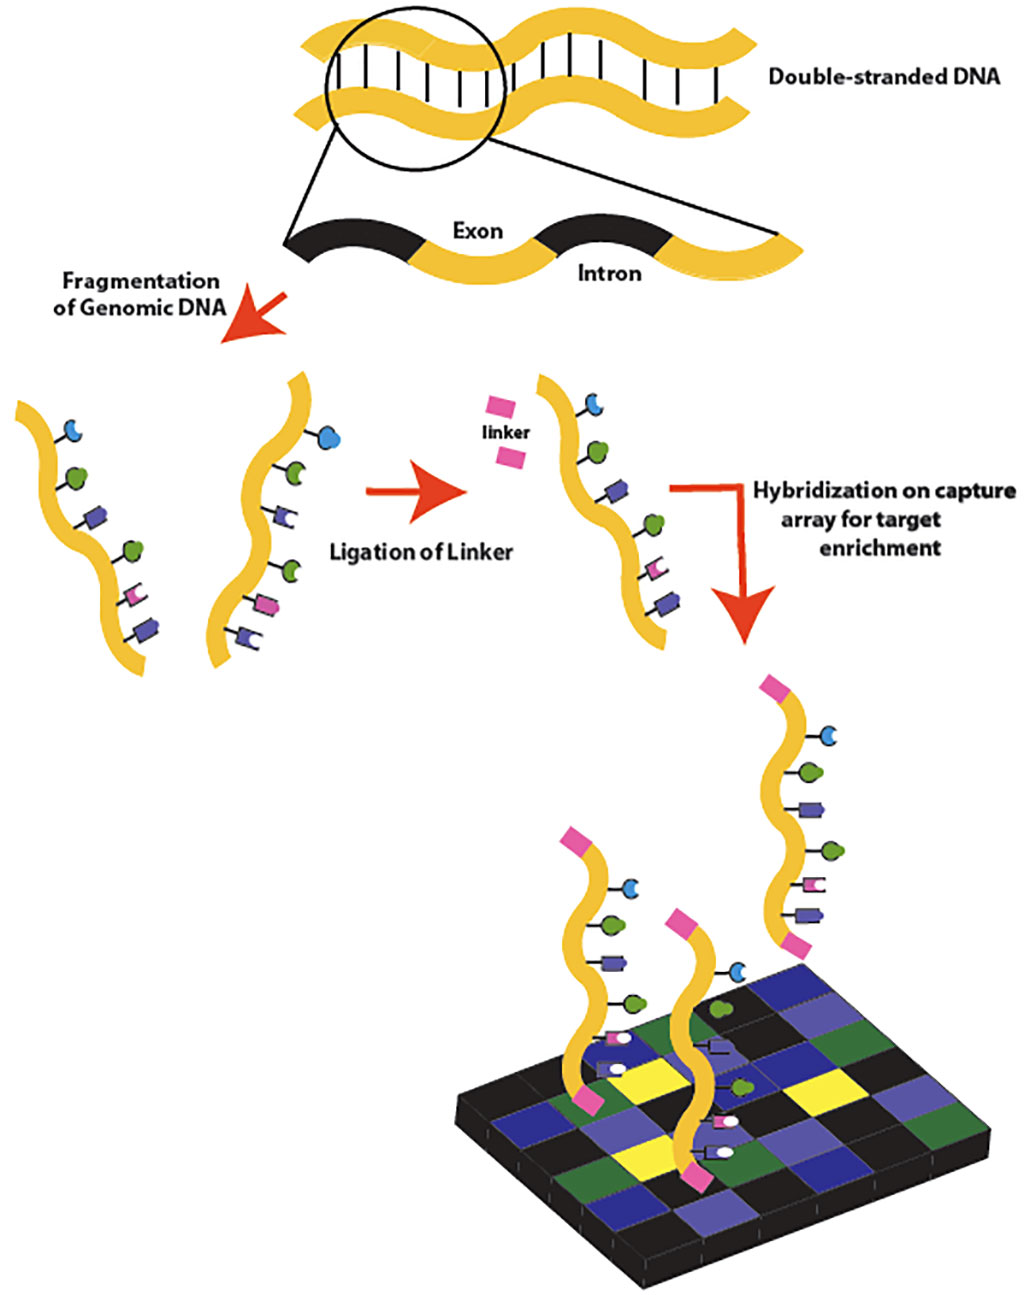 Image: Exome sequencing workflow: Double-stranded genomic DNA is fragmented by sonication. Linkers are then attached to the DNA fragments, which are then hybridized to a capture microarray designed to target only the exons (Photo courtesy of SarahKusala).